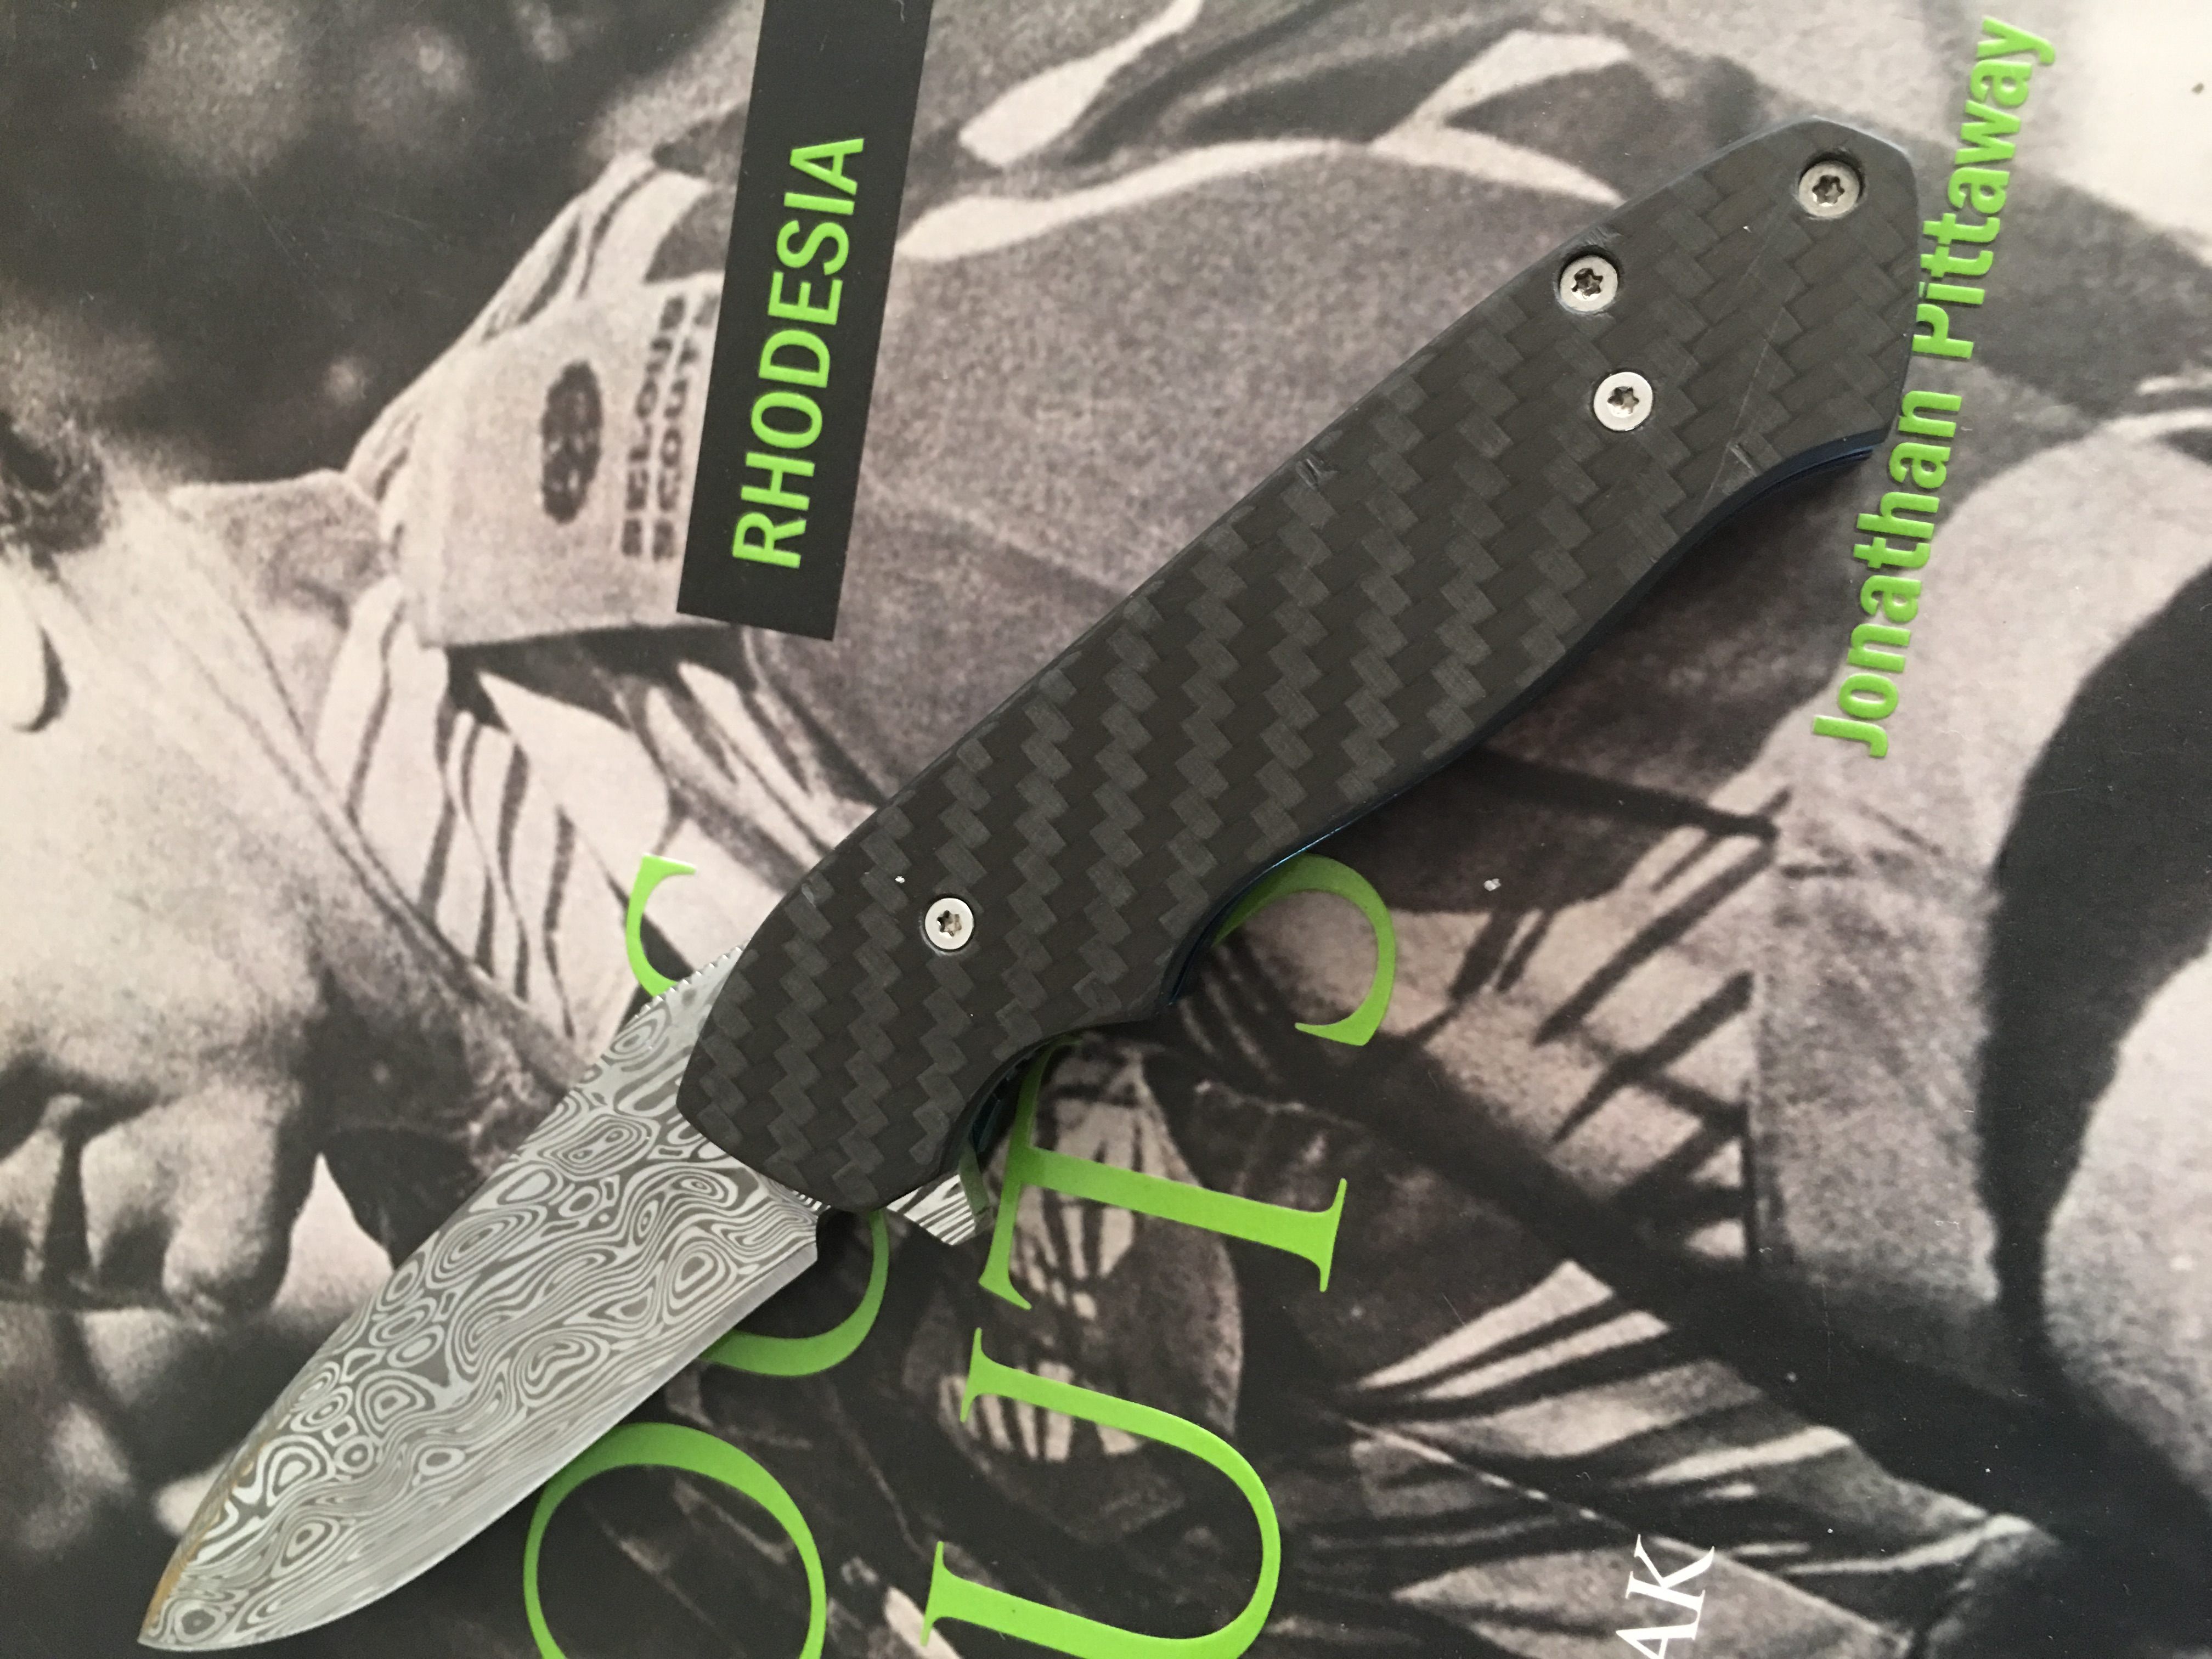 So here it is! The first folder . Carbon fibre scales over Anodised Titanium with a Biofrost Damasteel blade.